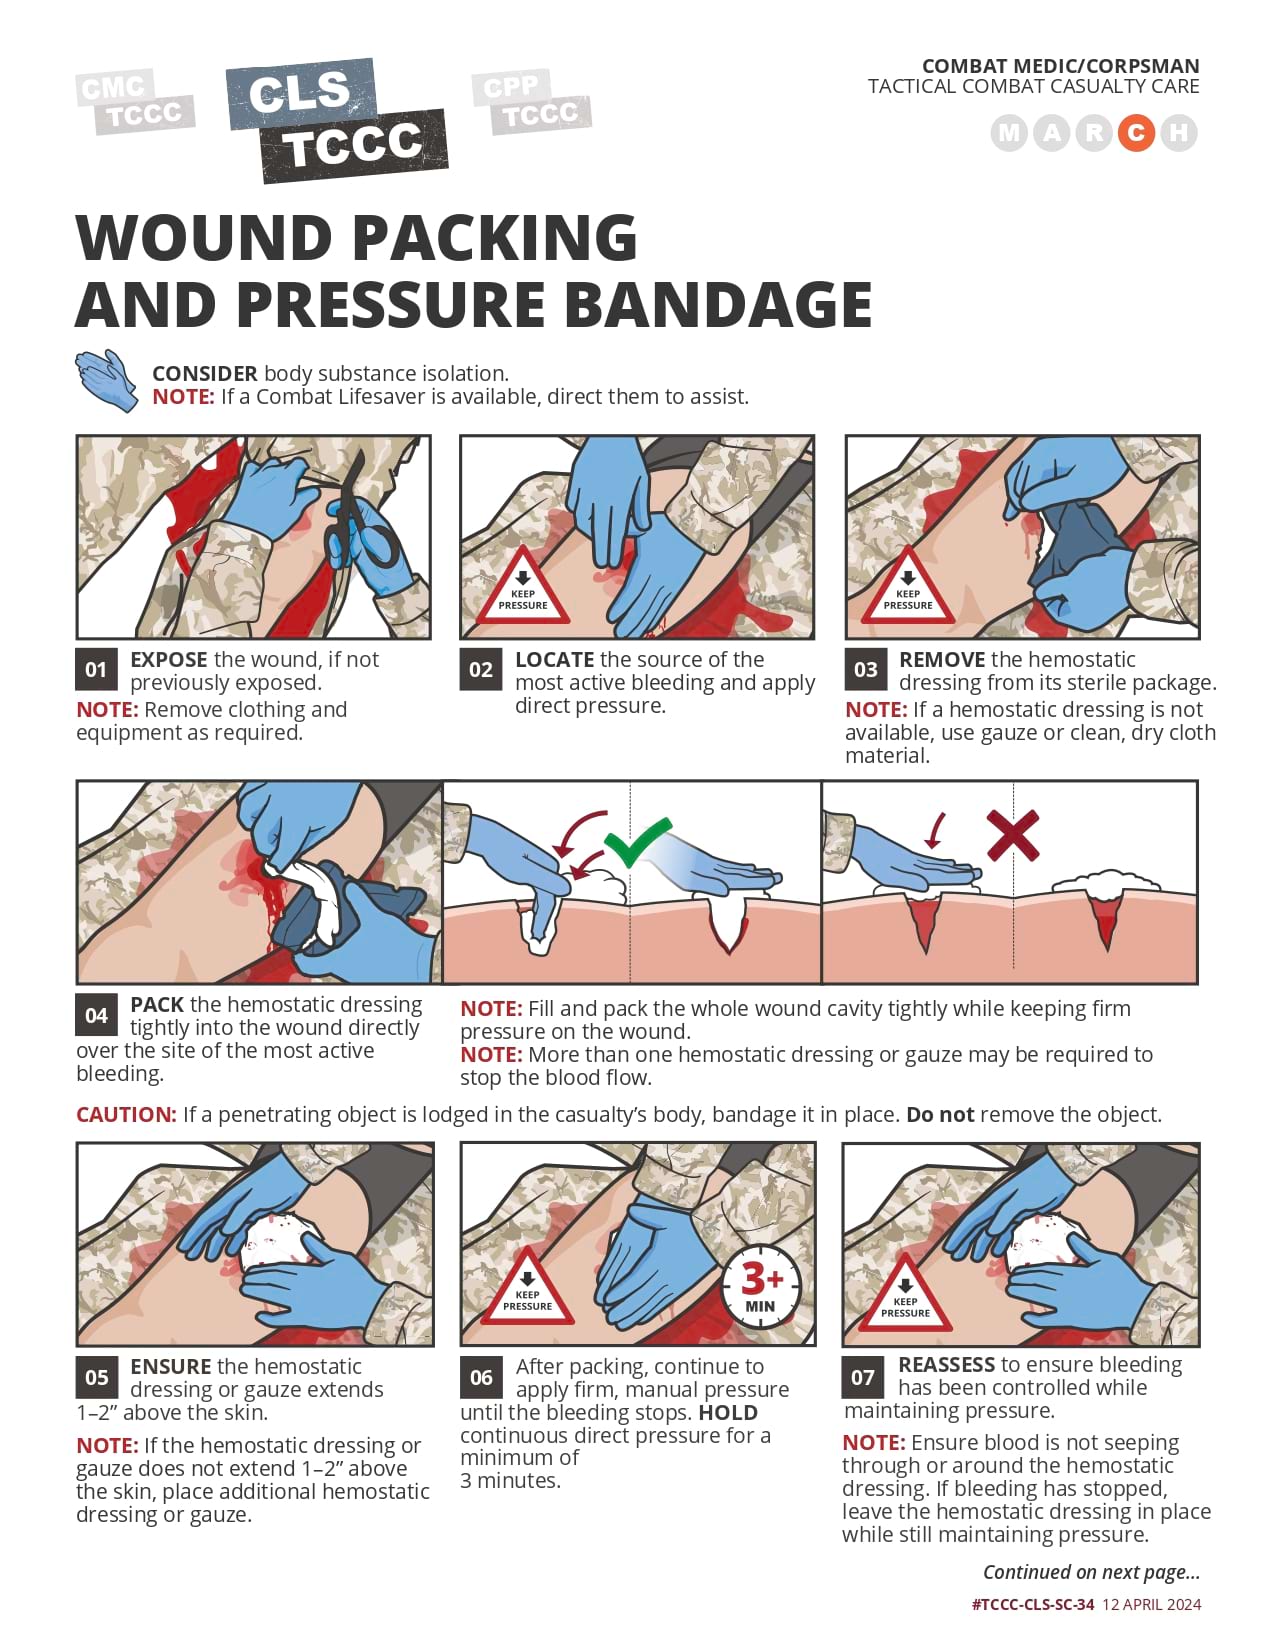 Wound Packing and Pressure Bandage, page 1